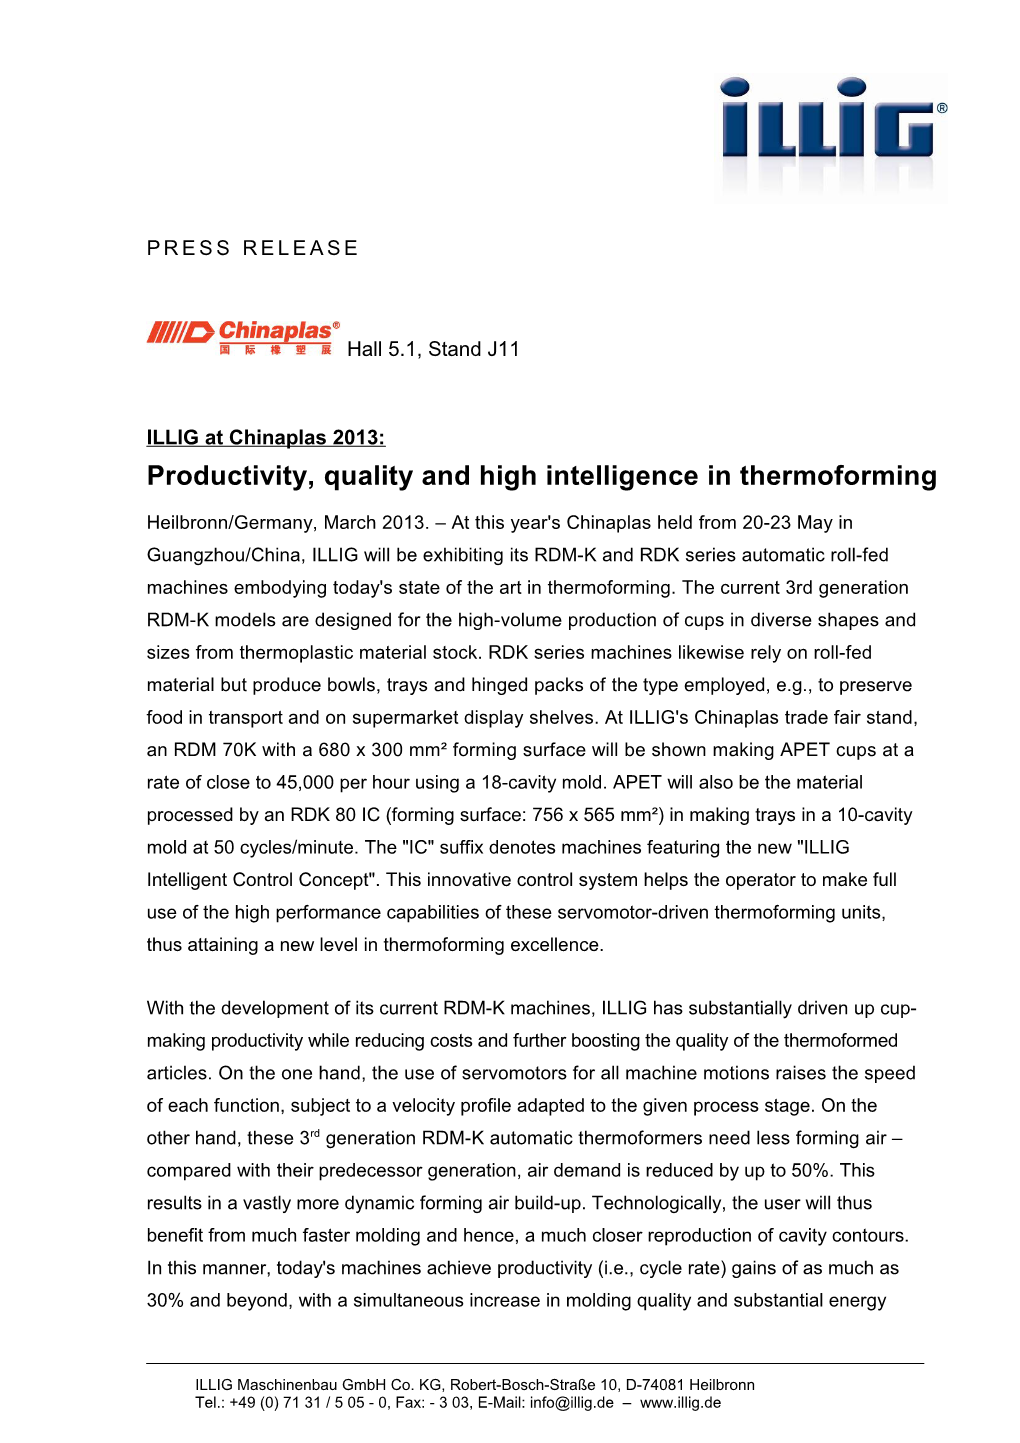 Page1of the Press Release: ILLIG at Chinaplas 2013 Productivity, Qualityand Highintelligence